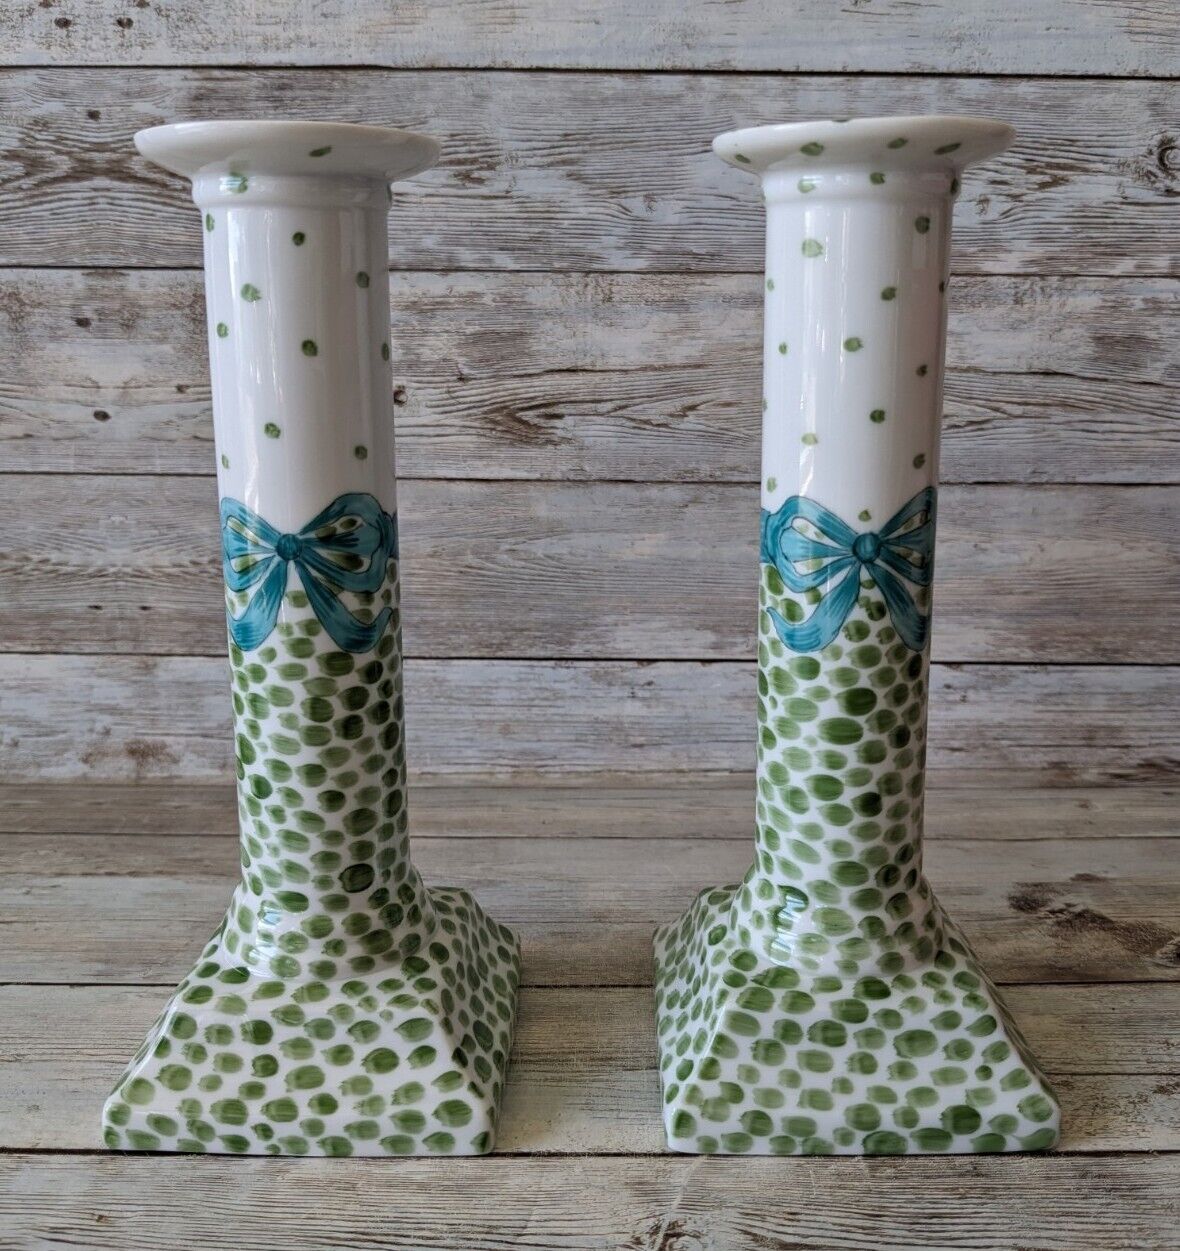 Vintage Polka Dots And Bows Porcelain Candlesticks Hand Painted In USA